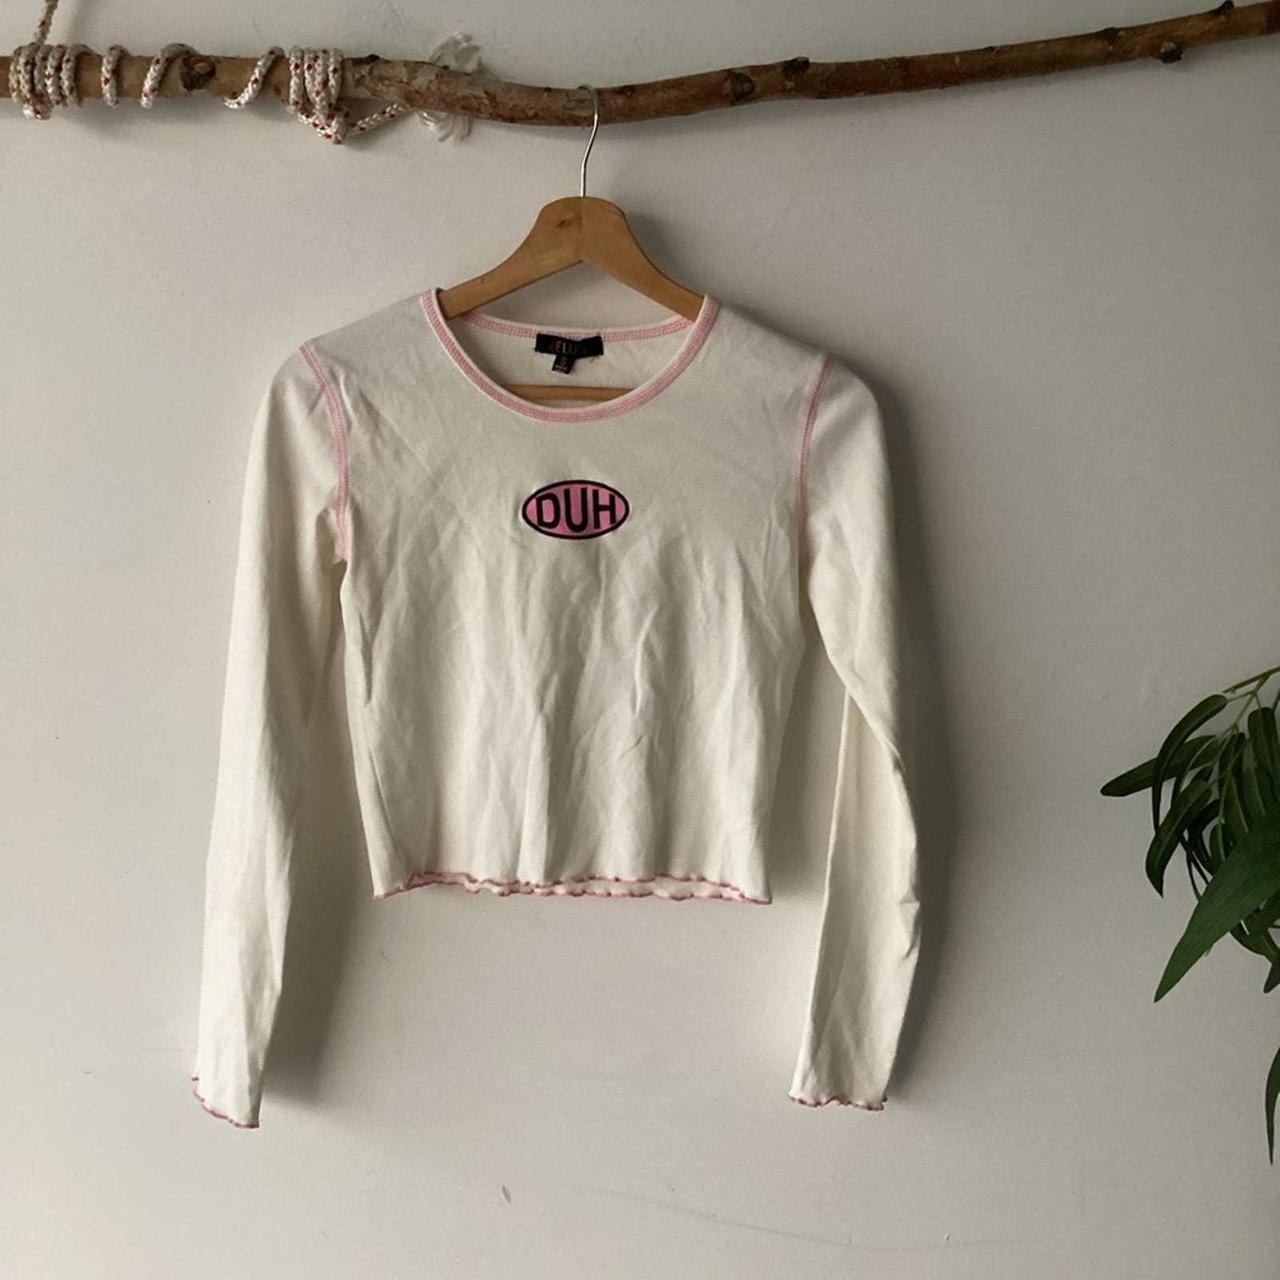 Delia's Women's White and Pink Shirt